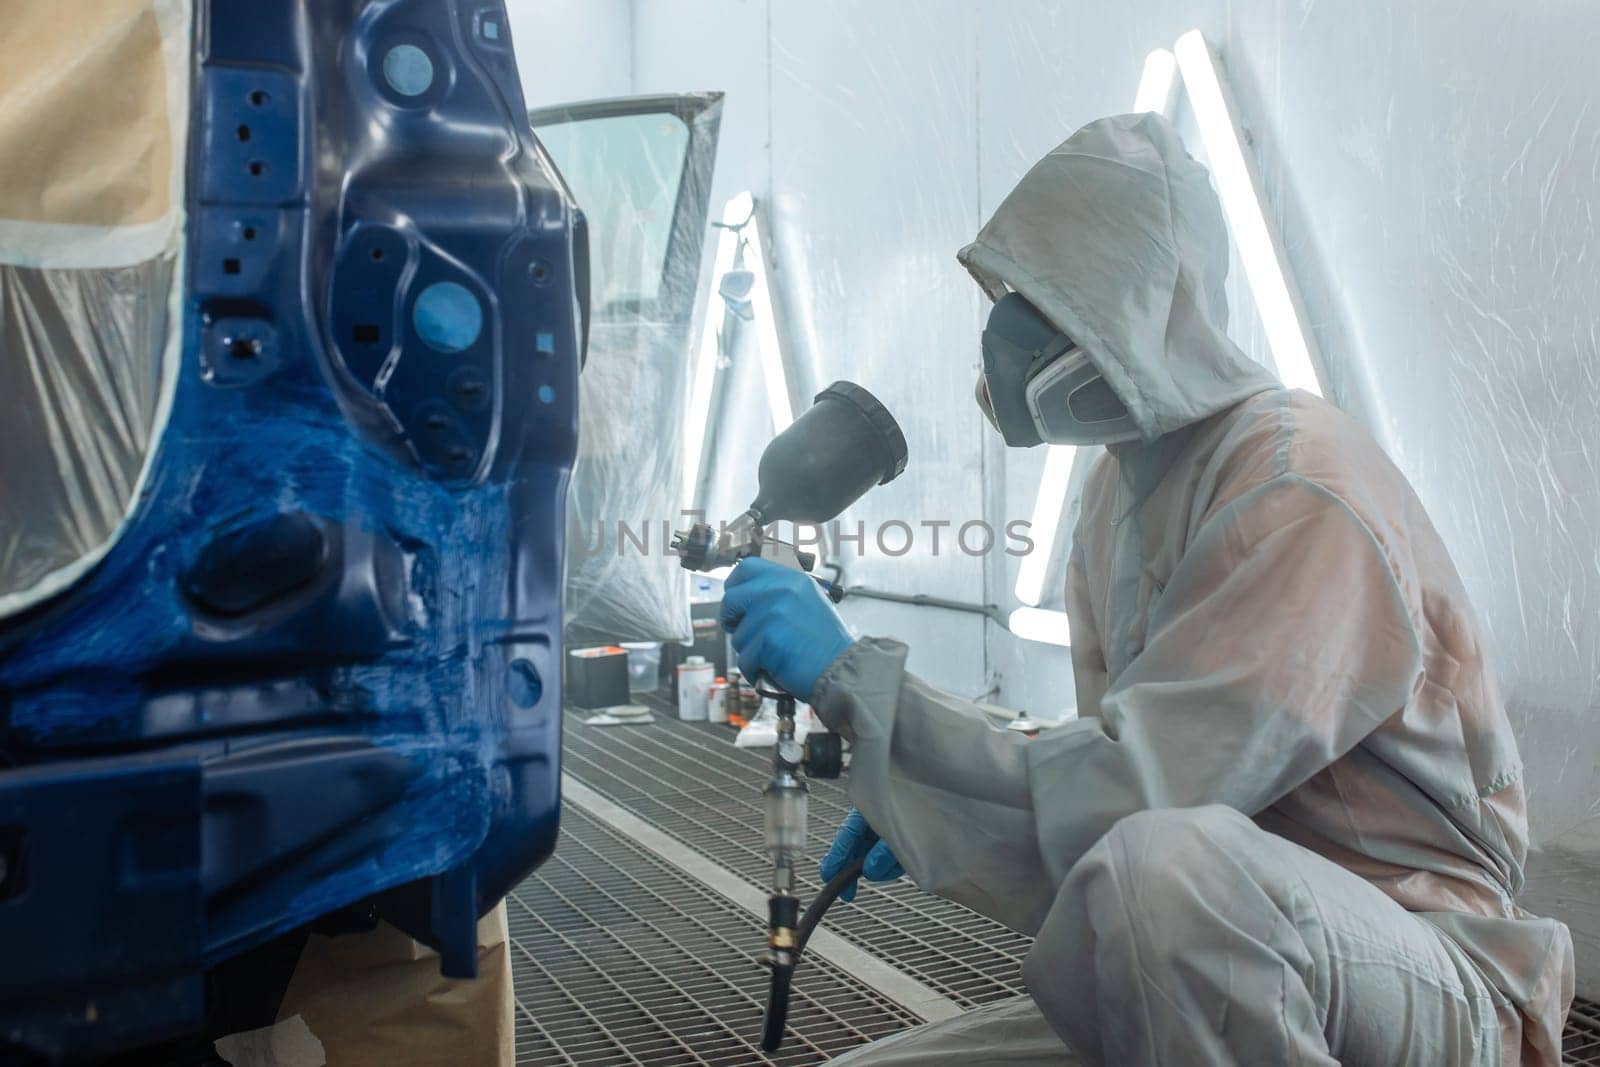 automobile repairman painter hand in protective glove with airbrush pulverizer painting car body in paint chamber